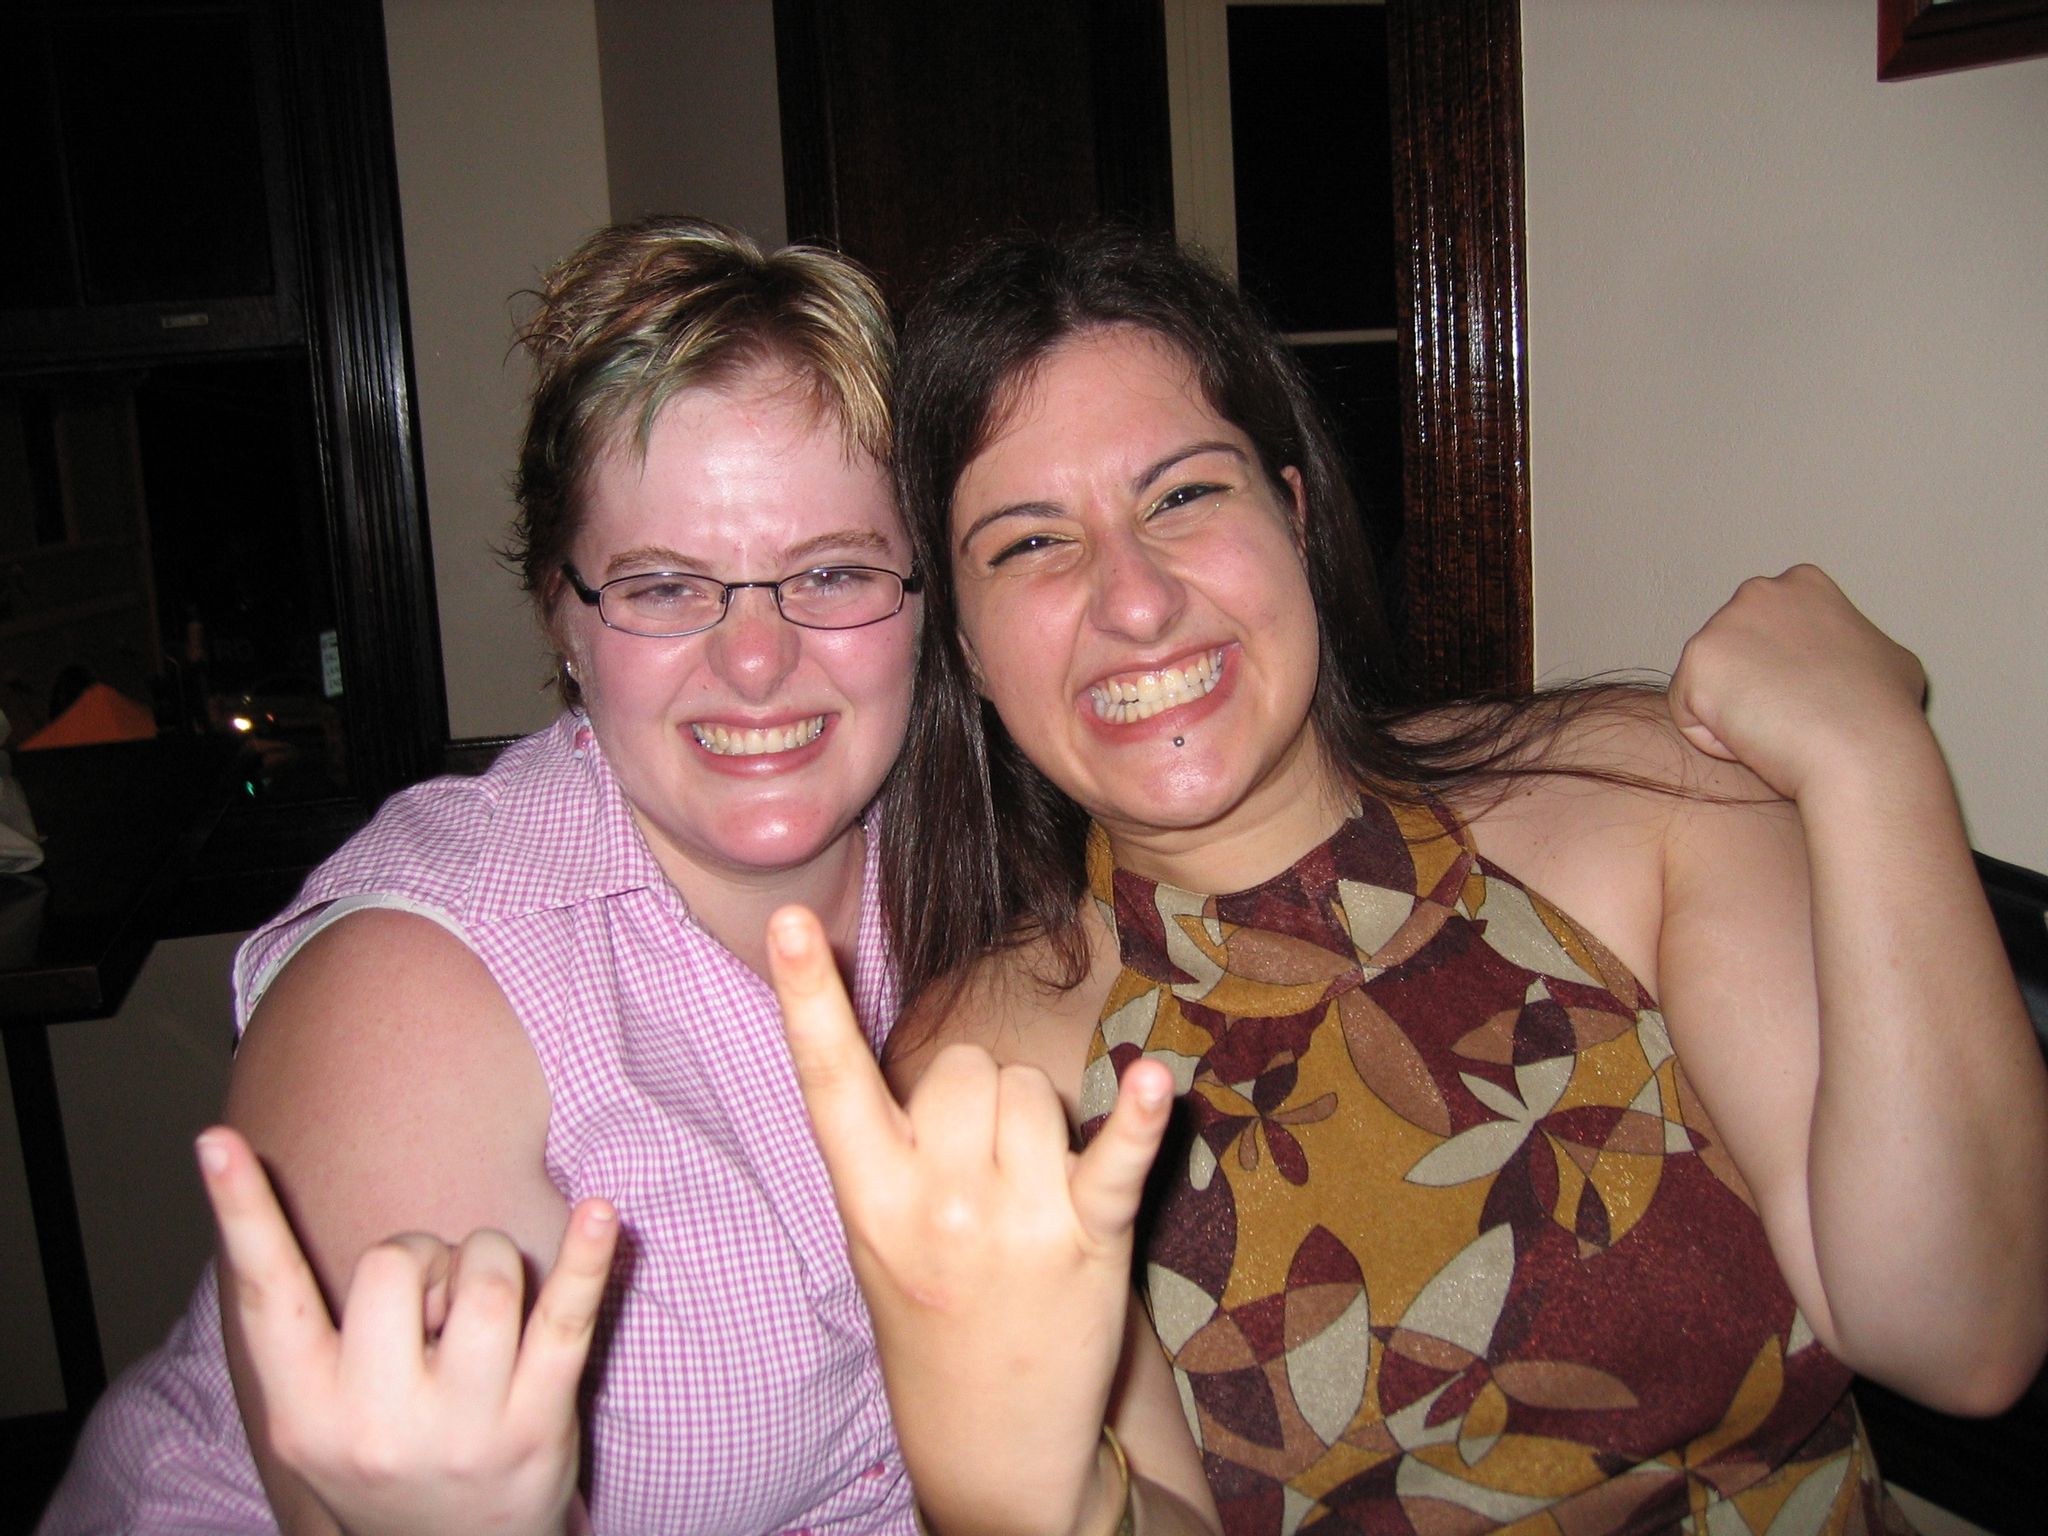 A photo of two women grinning and throwing the horns.